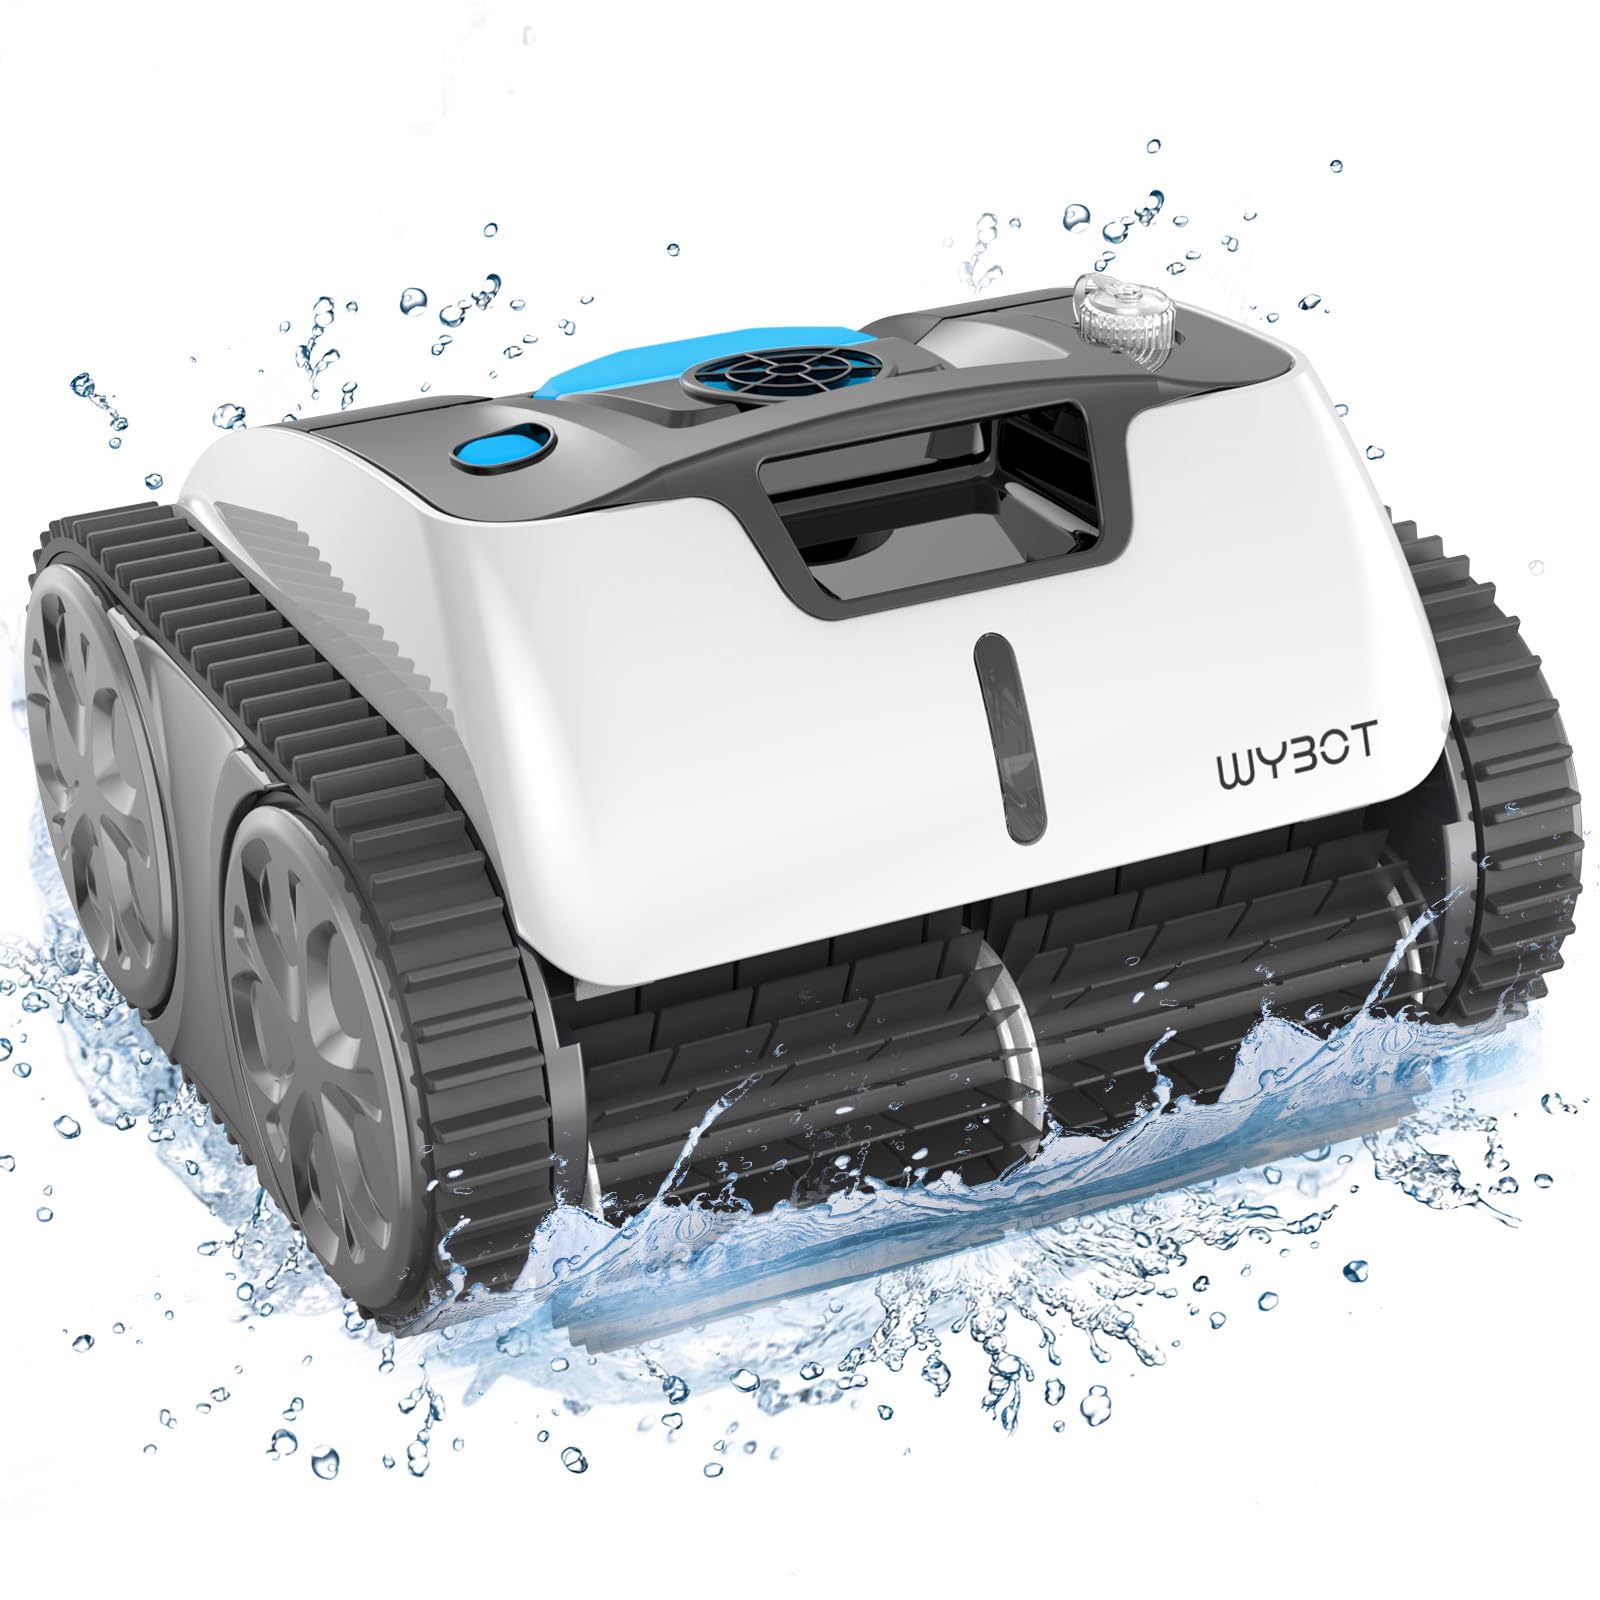 WYBOT Cordless Robotic Pool Cleaner, Ultra Strong Suction, Wall Climb Pool Vacuum with Intelligent Route Planning, Lasts 110Mins, Triple-Motor, Ideal for In-Ground Pools Up to 60 Feet (Black) (WY004)